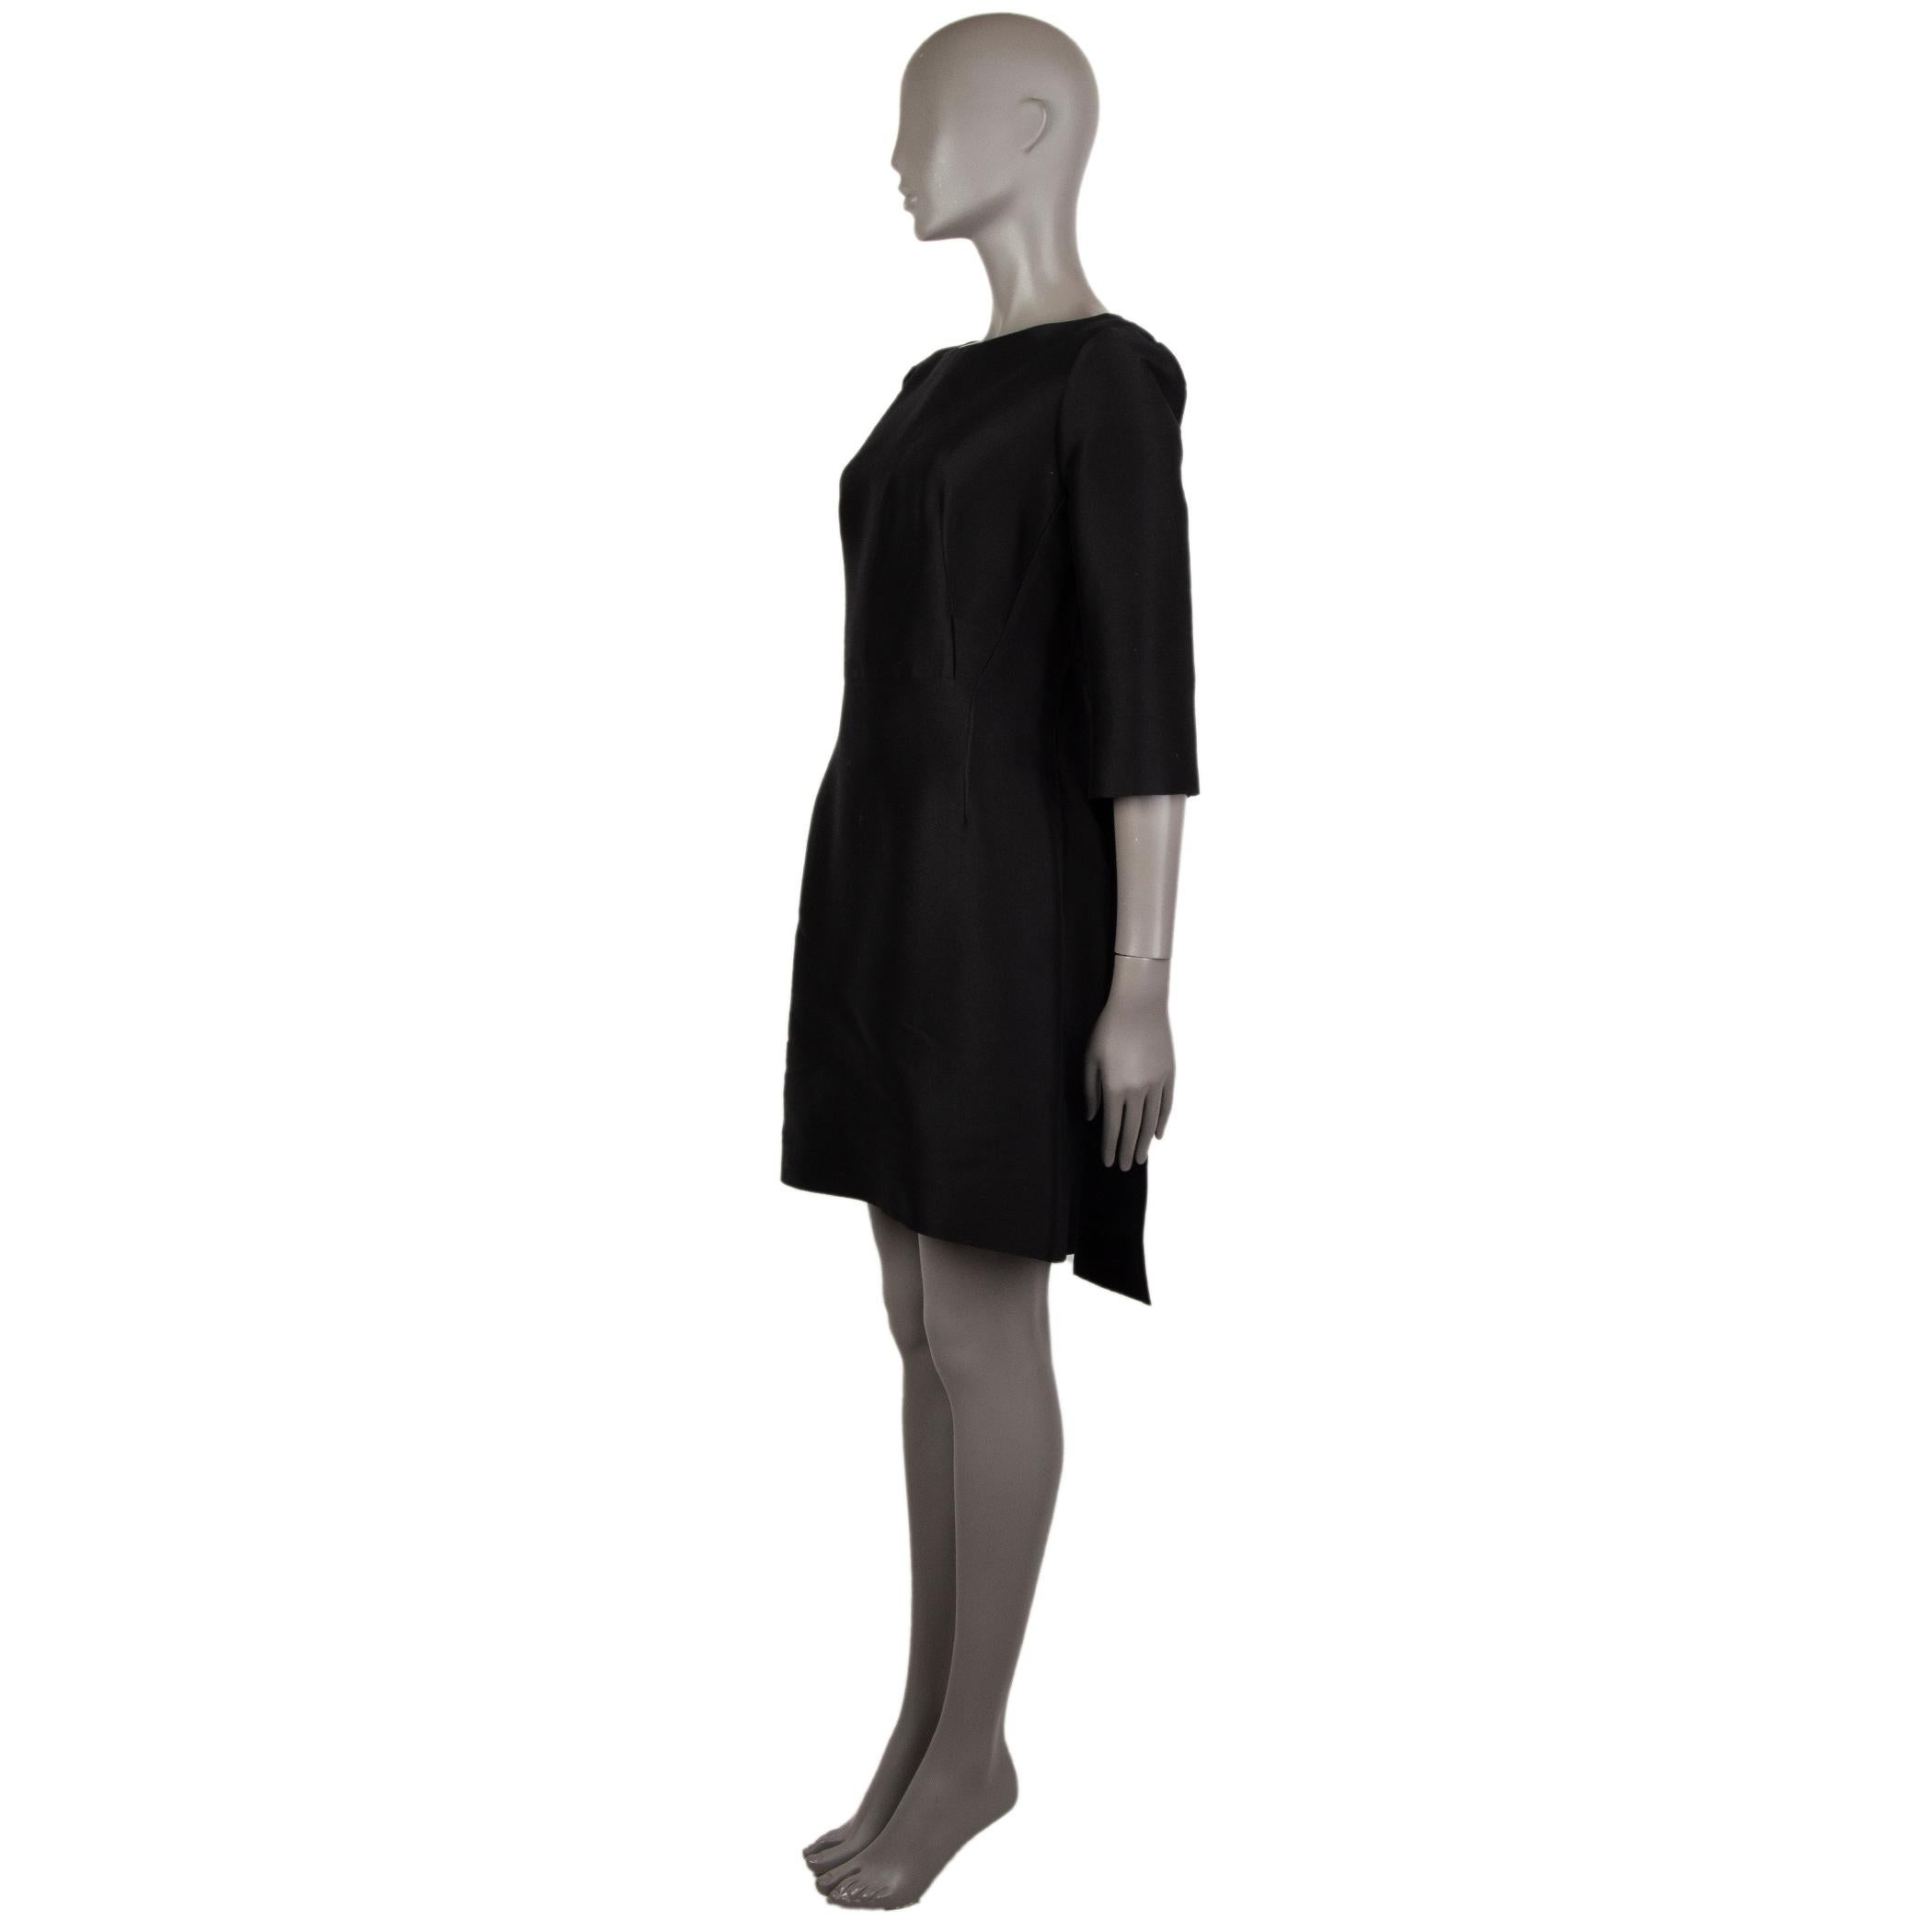 100% authentic Balenciaga 3/4-sleeve sheath dress in black cotton (88%) and silk (12%). With two pleated train flaps on the back of the skirt. Closes with hook and invisible zipper on the back. Unlined. Has been worn and is in excellent